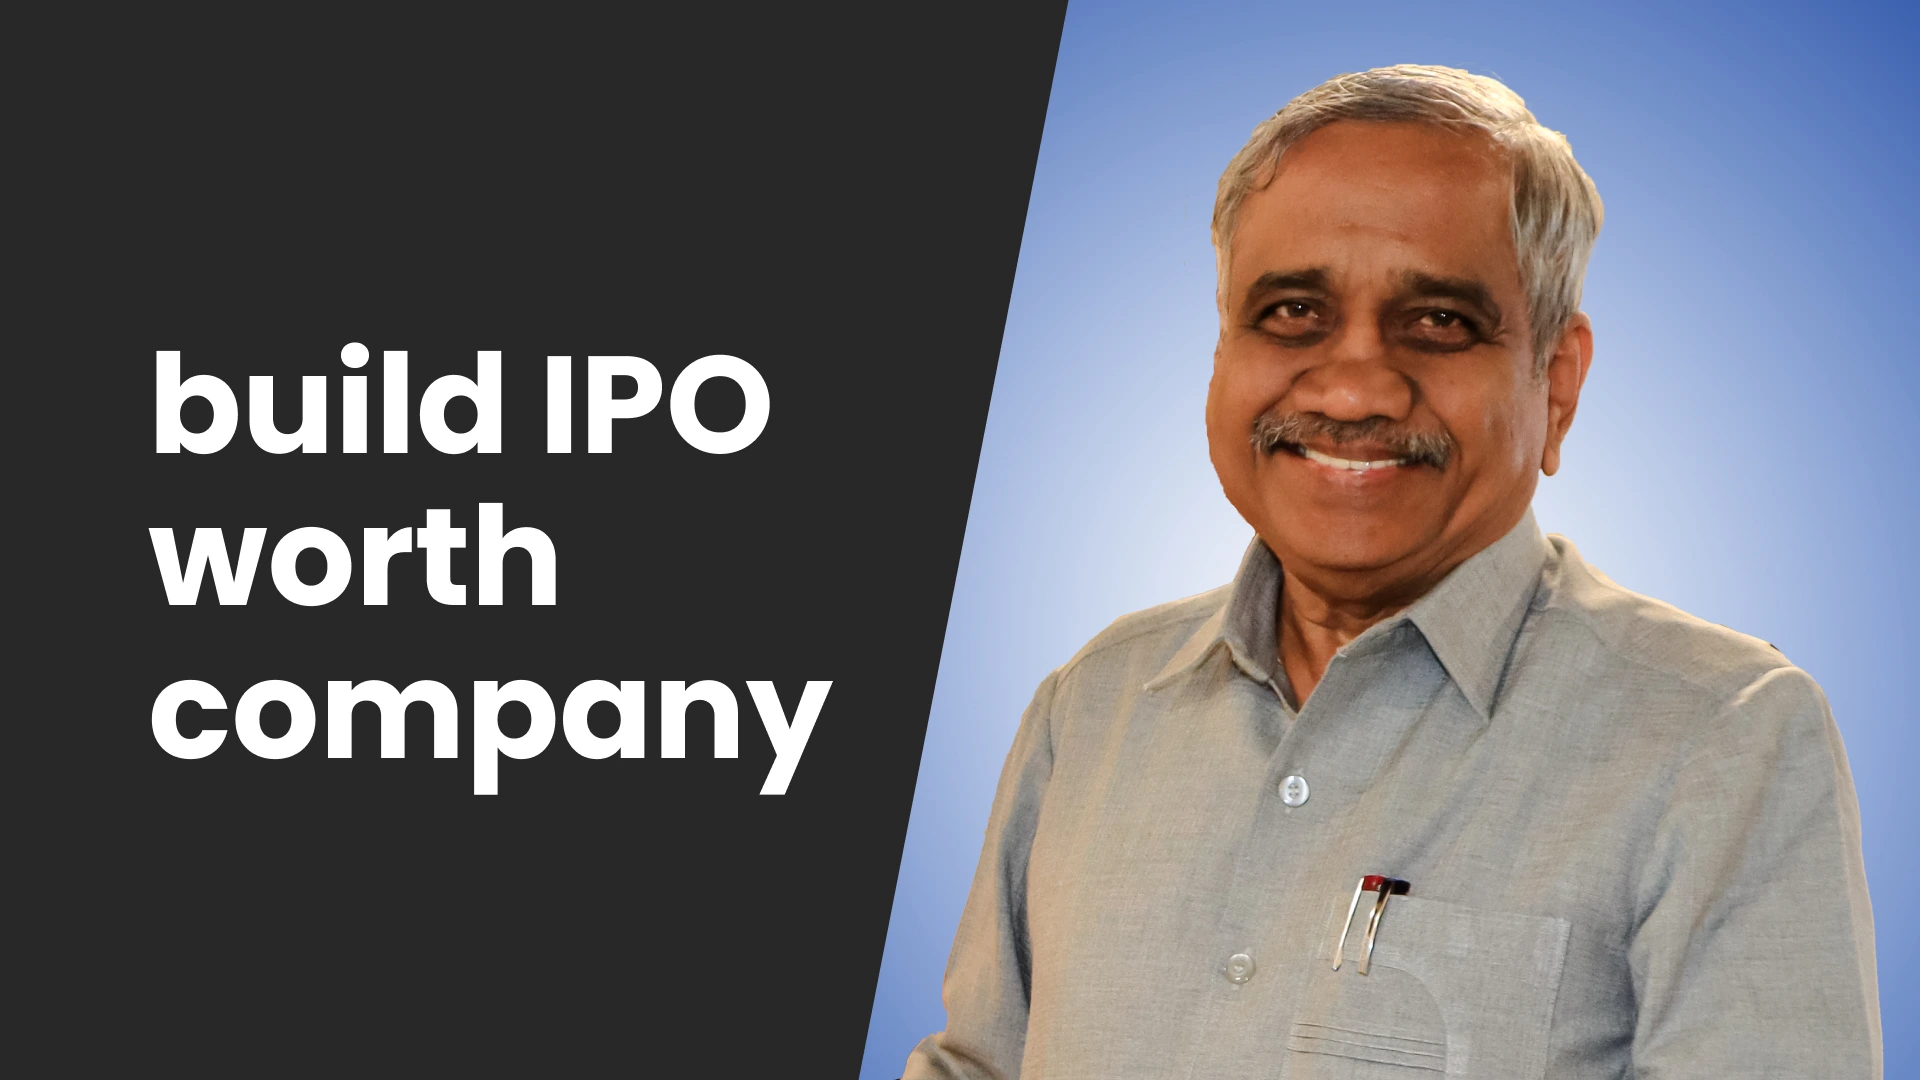 Course Trailer: How To Build an IPO Worth logistics company?. Watch to know more.